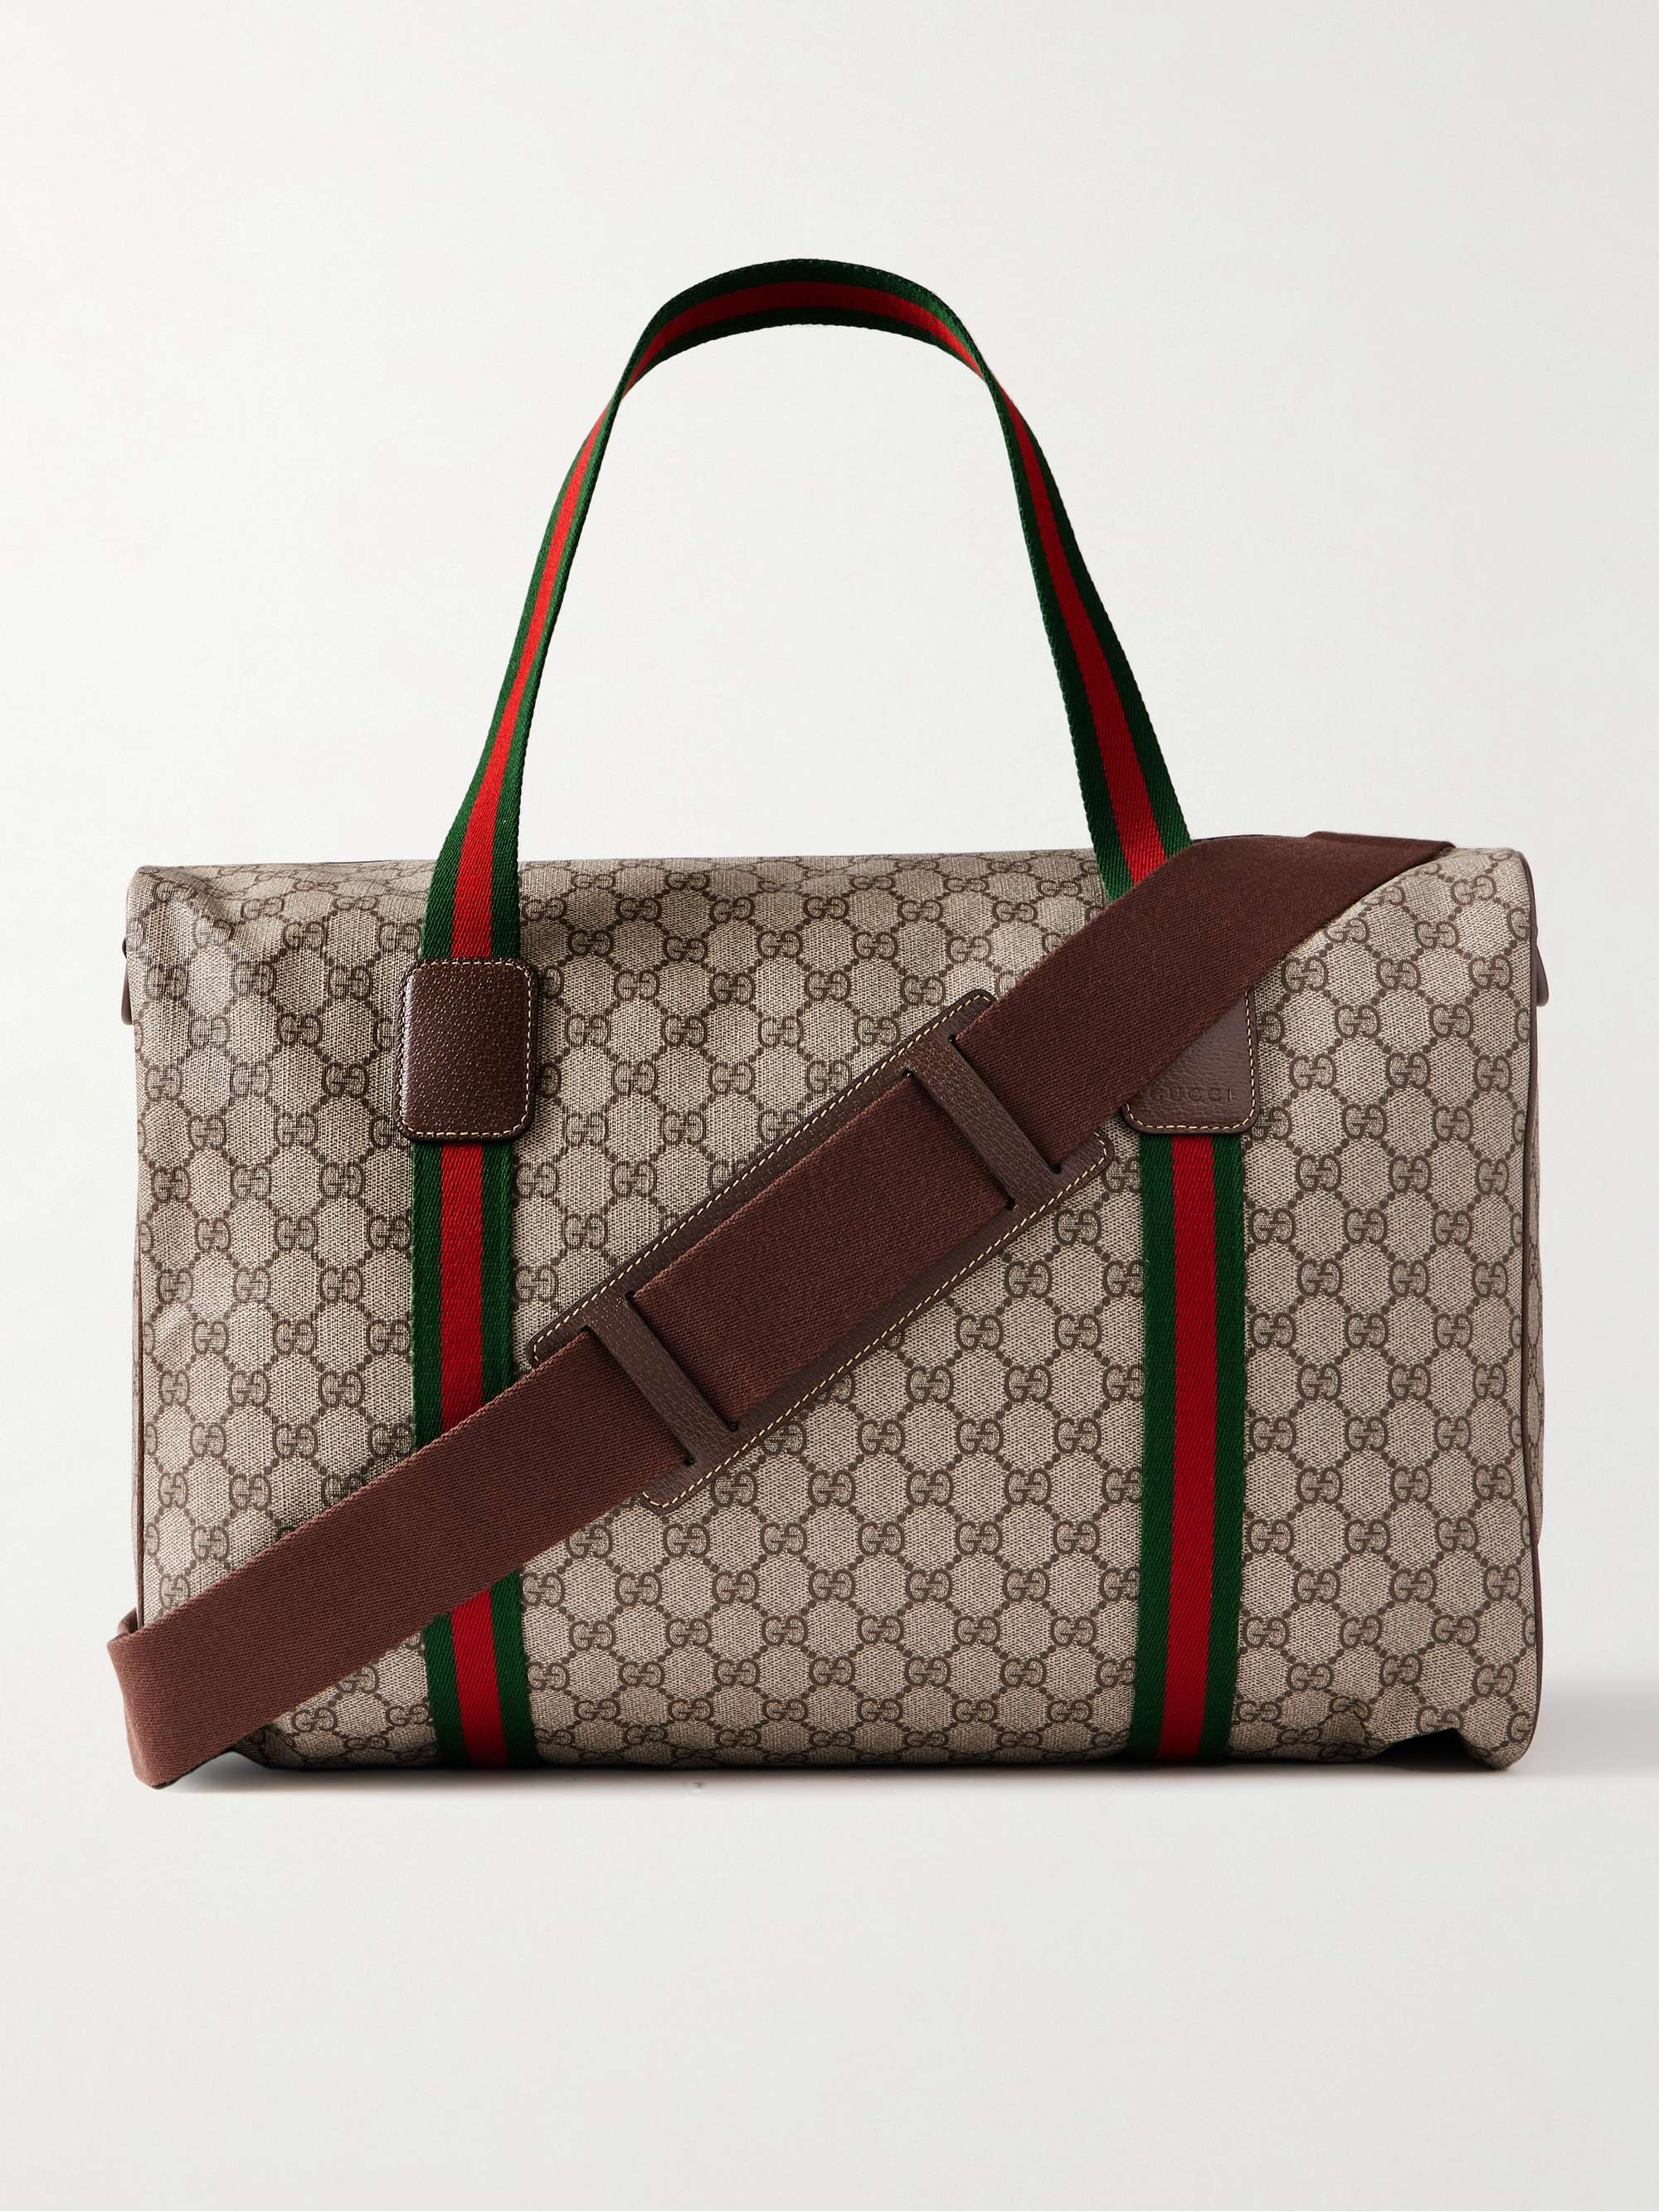 GUCCI Ophidia Leather-Trimmed Monogrammed Coated-Canvas Tote Bag for Men